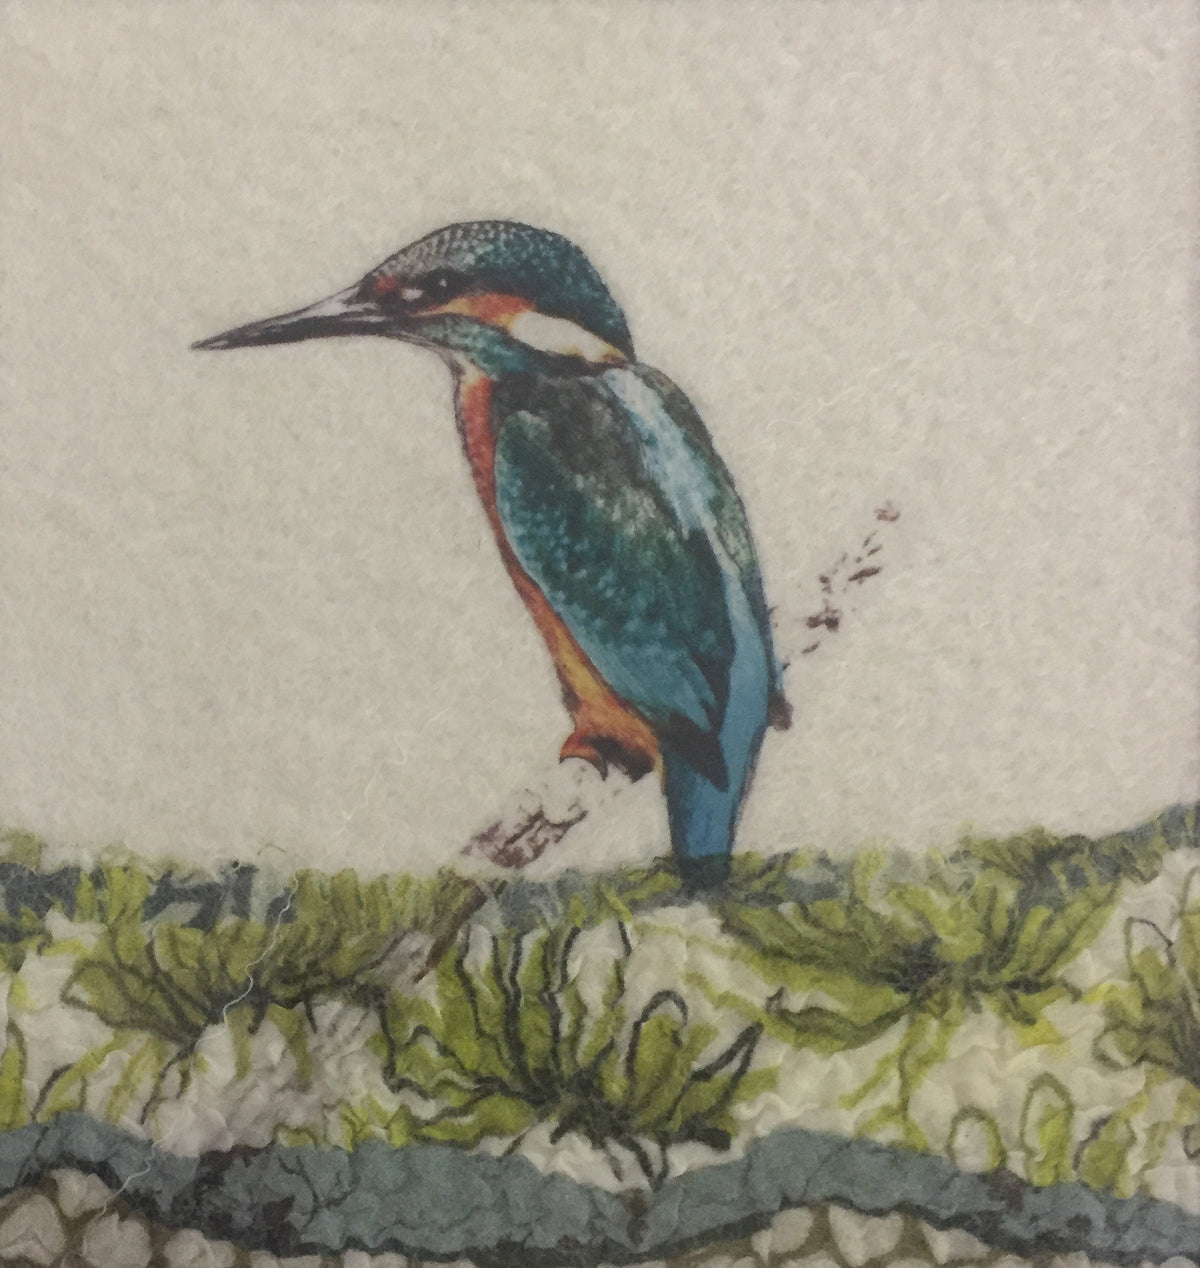 Kingfisher - textile art by Lindsey Tyson